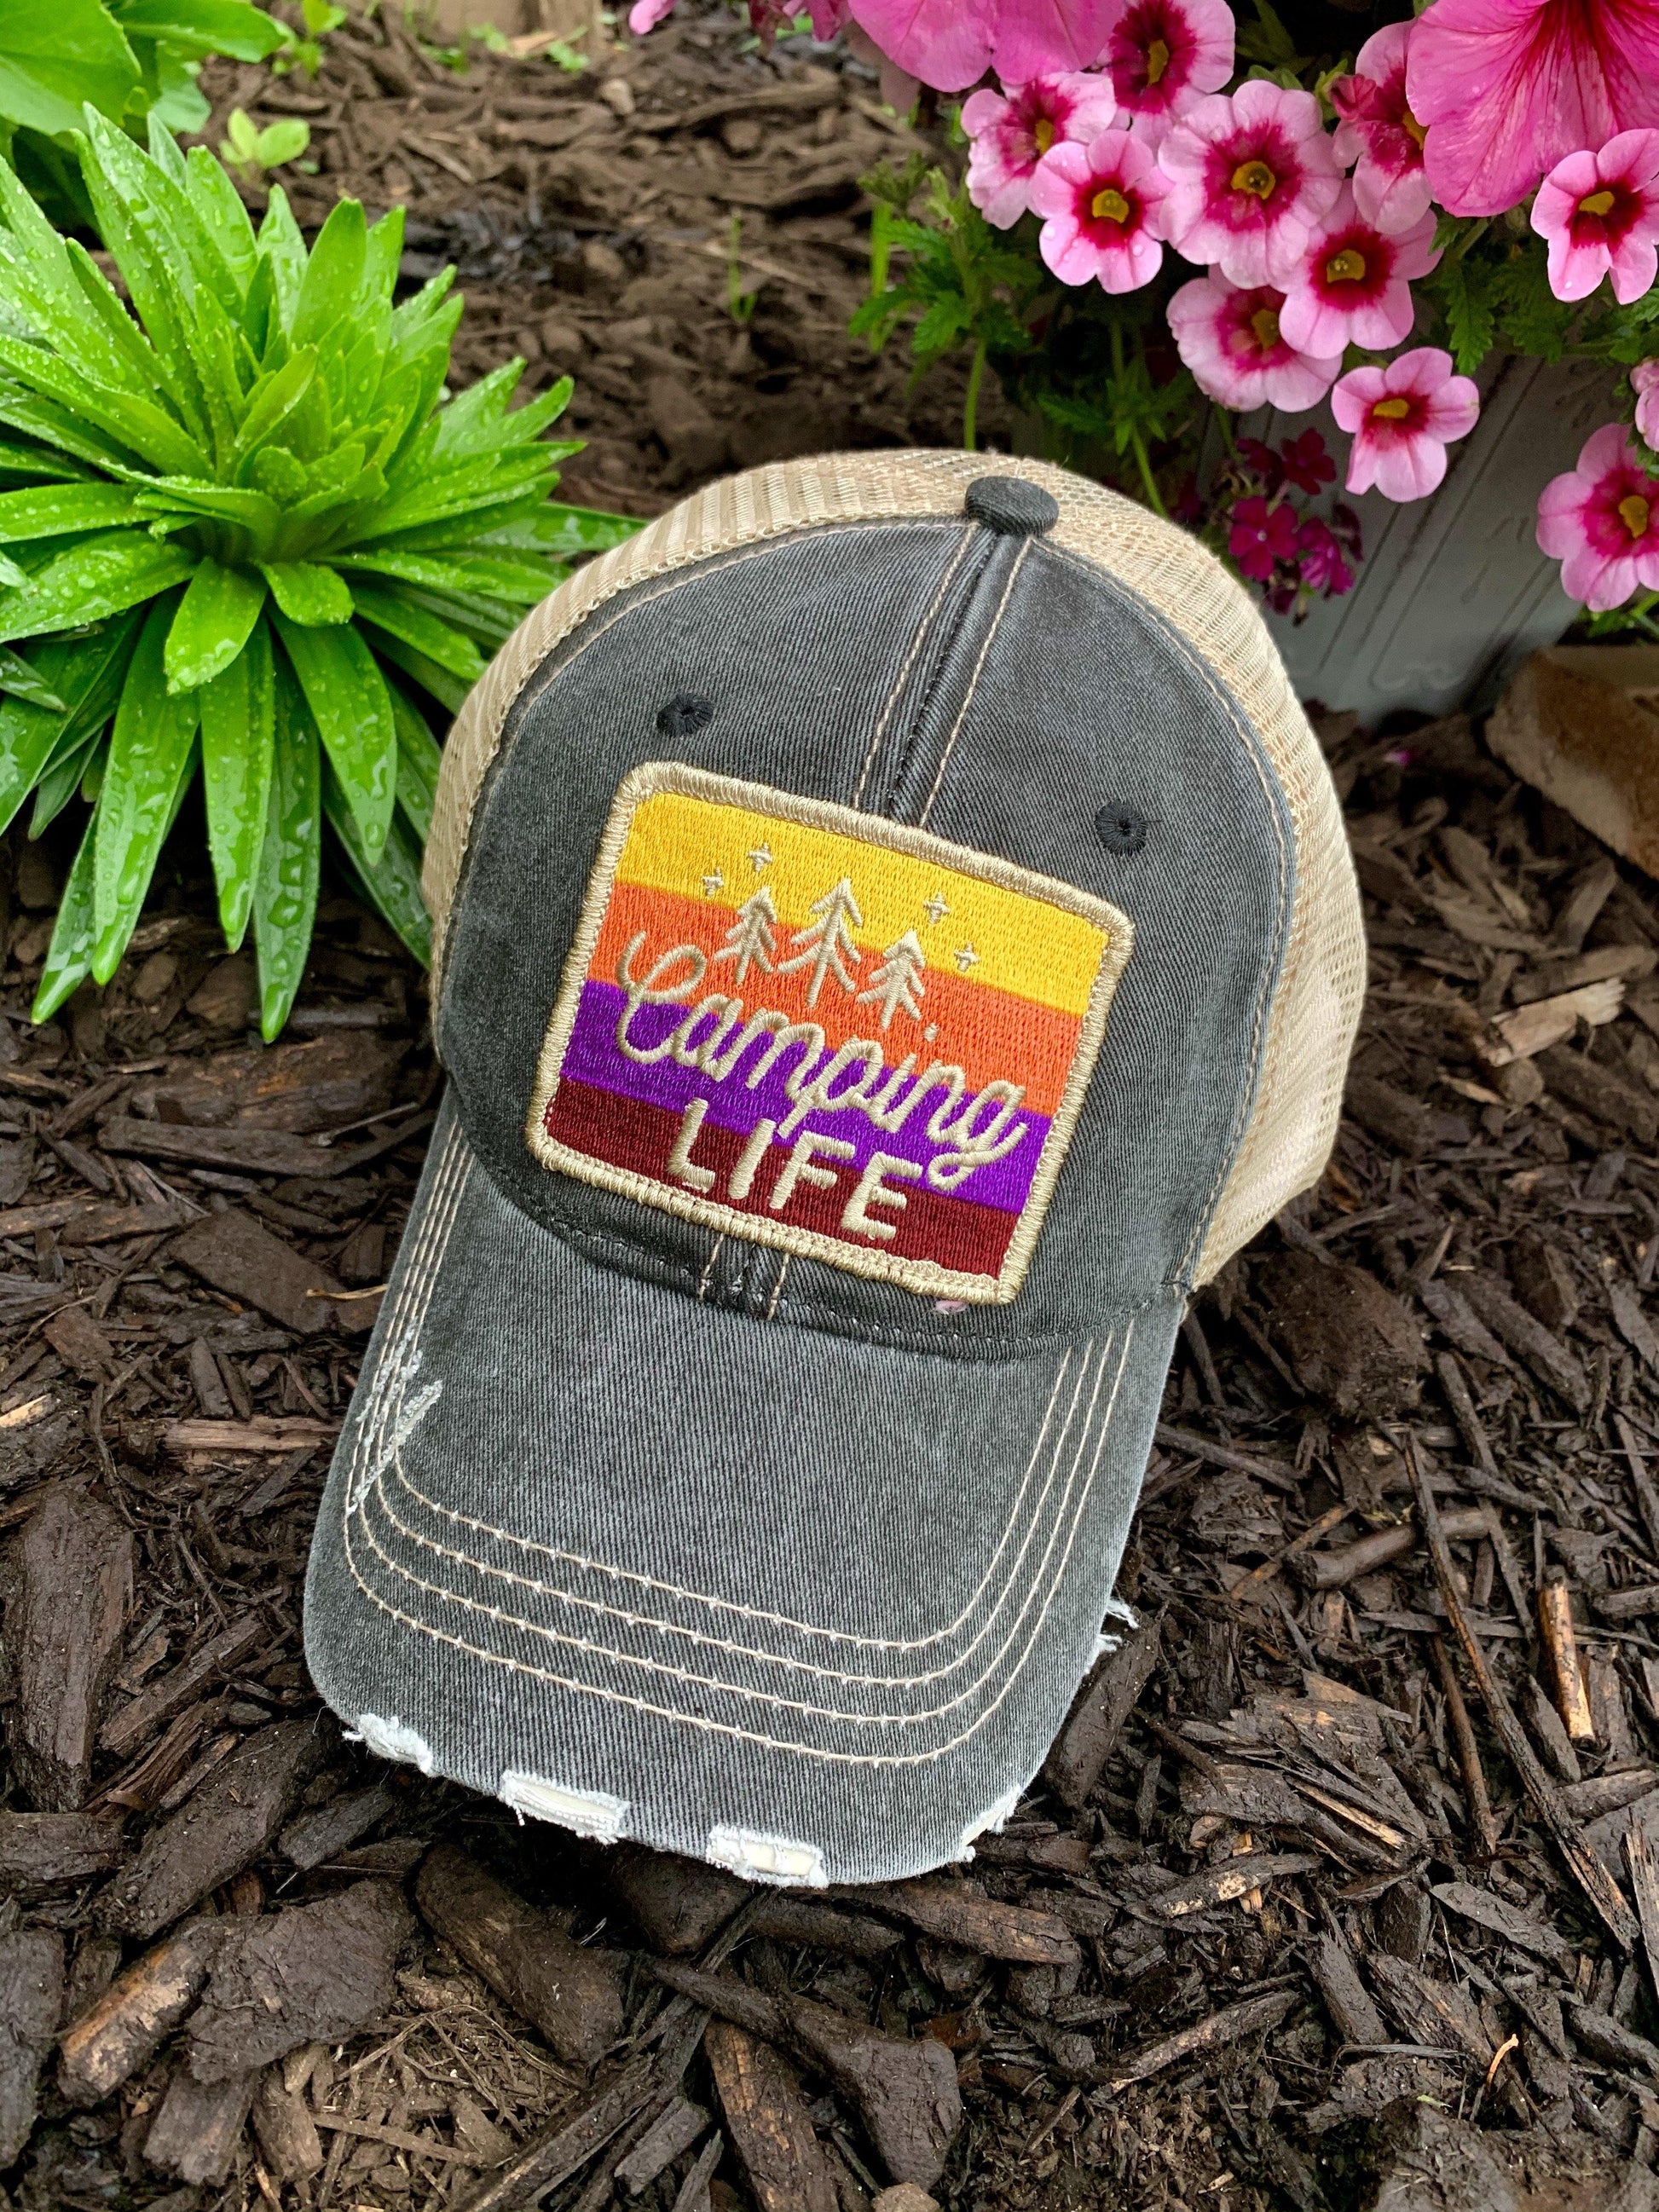 Camp Hats! Hats { Camping Life } 4 Colors. Embroidered Distressed Trucker Caps. Pink